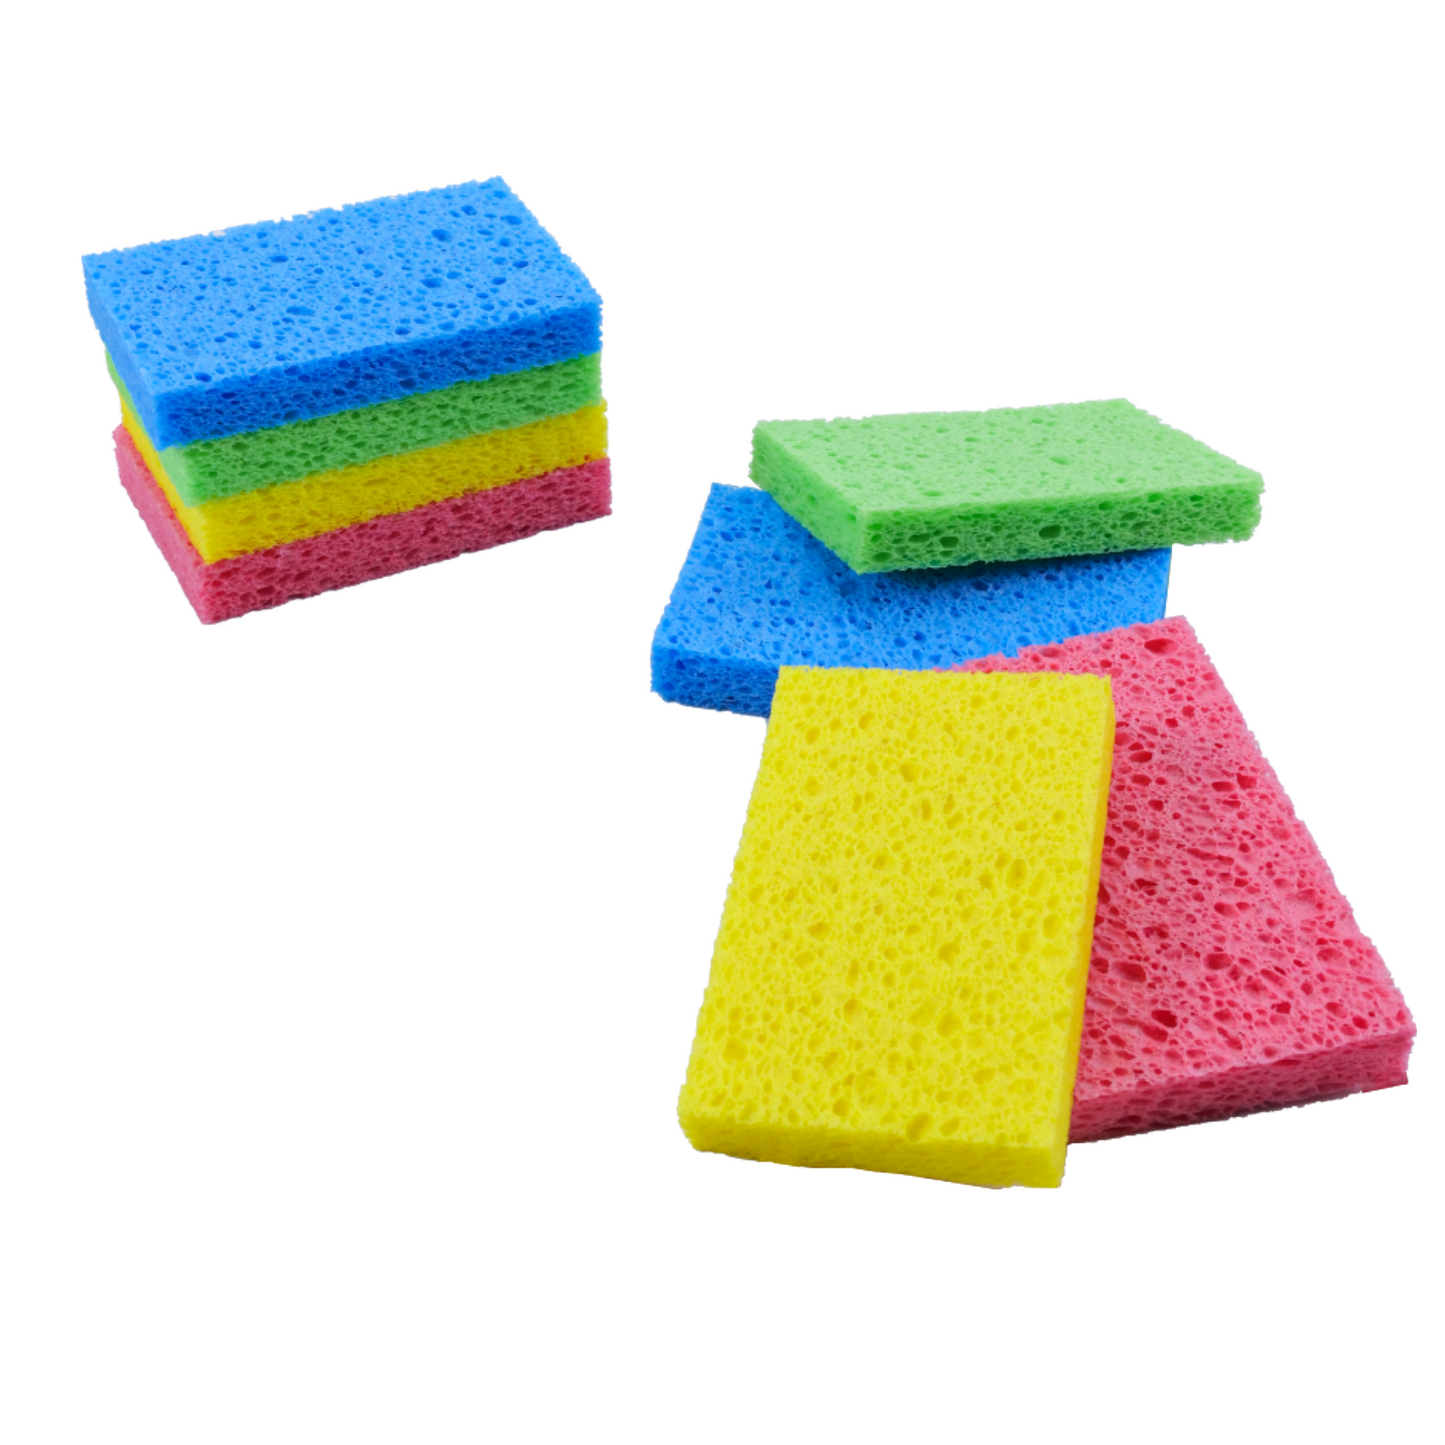 Reusable Cellulose Cleaning Sponges